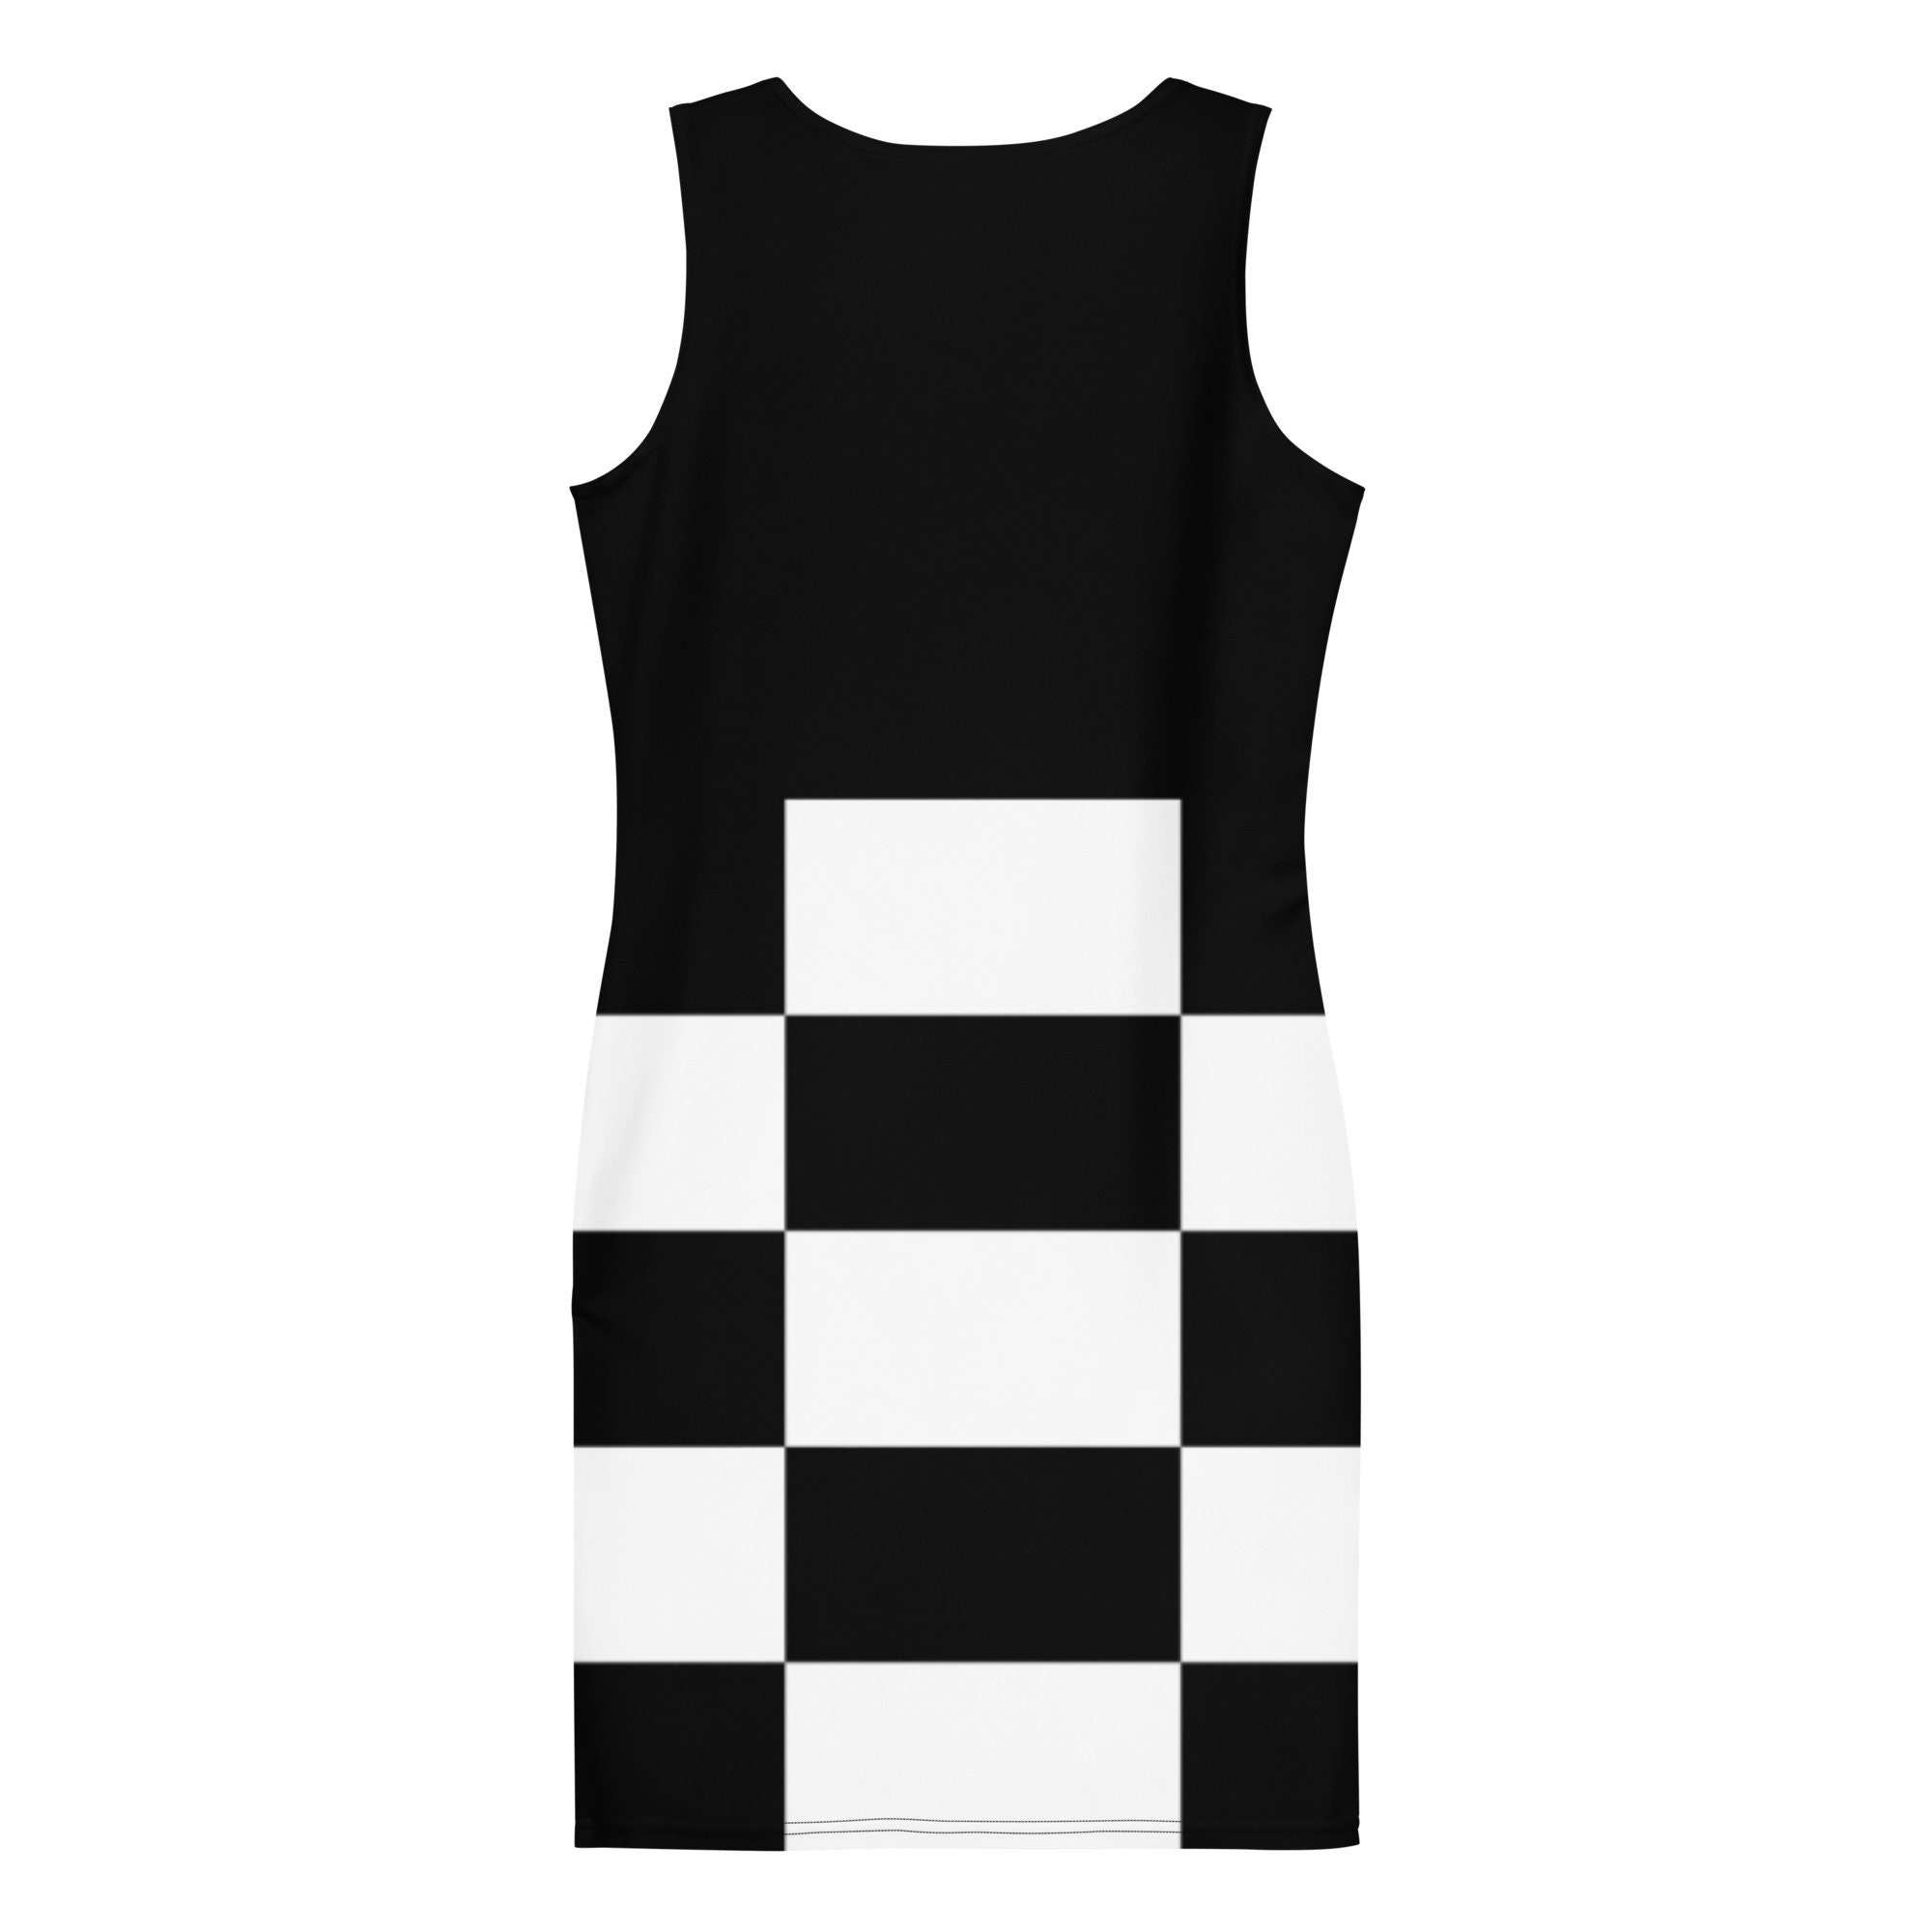 Black and White Check Dress , Black and White Checkered Dress , Checkered  Pattern Black and White Women\'s Sublimation Cut & Sew Dress - Etsy